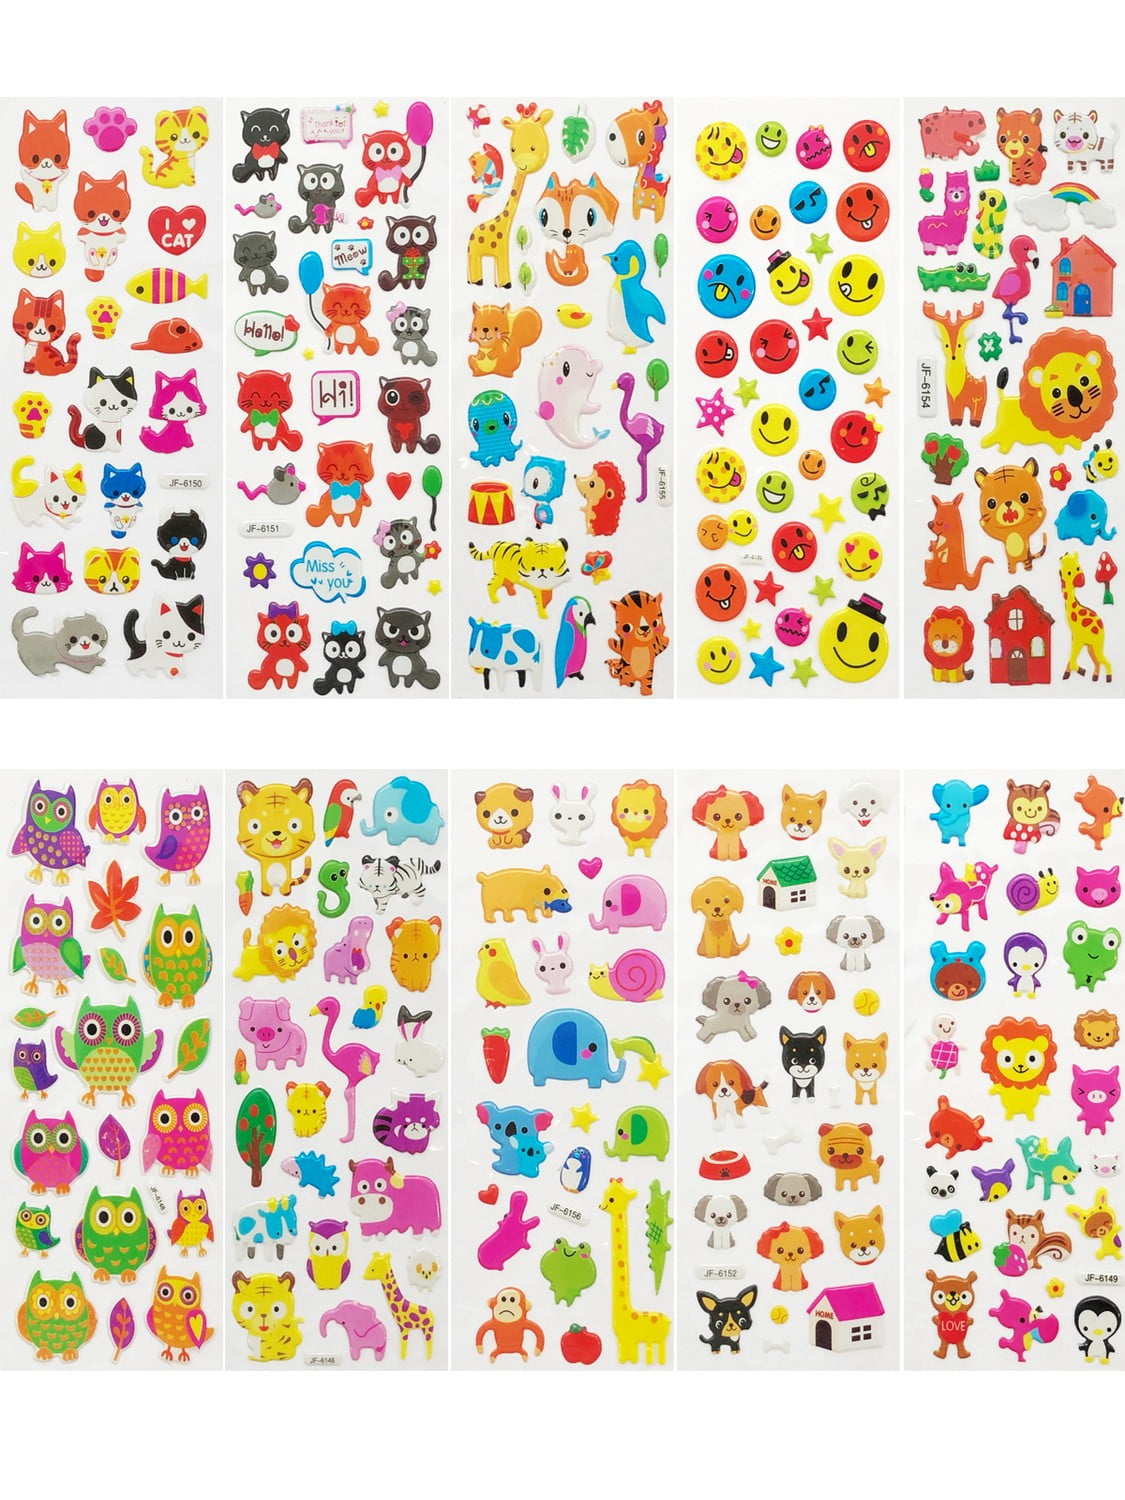 NEW 3 Sheets Puffy 3D Cartoon Stickers Scrapbook Kids Party Bag Favors Crafts 